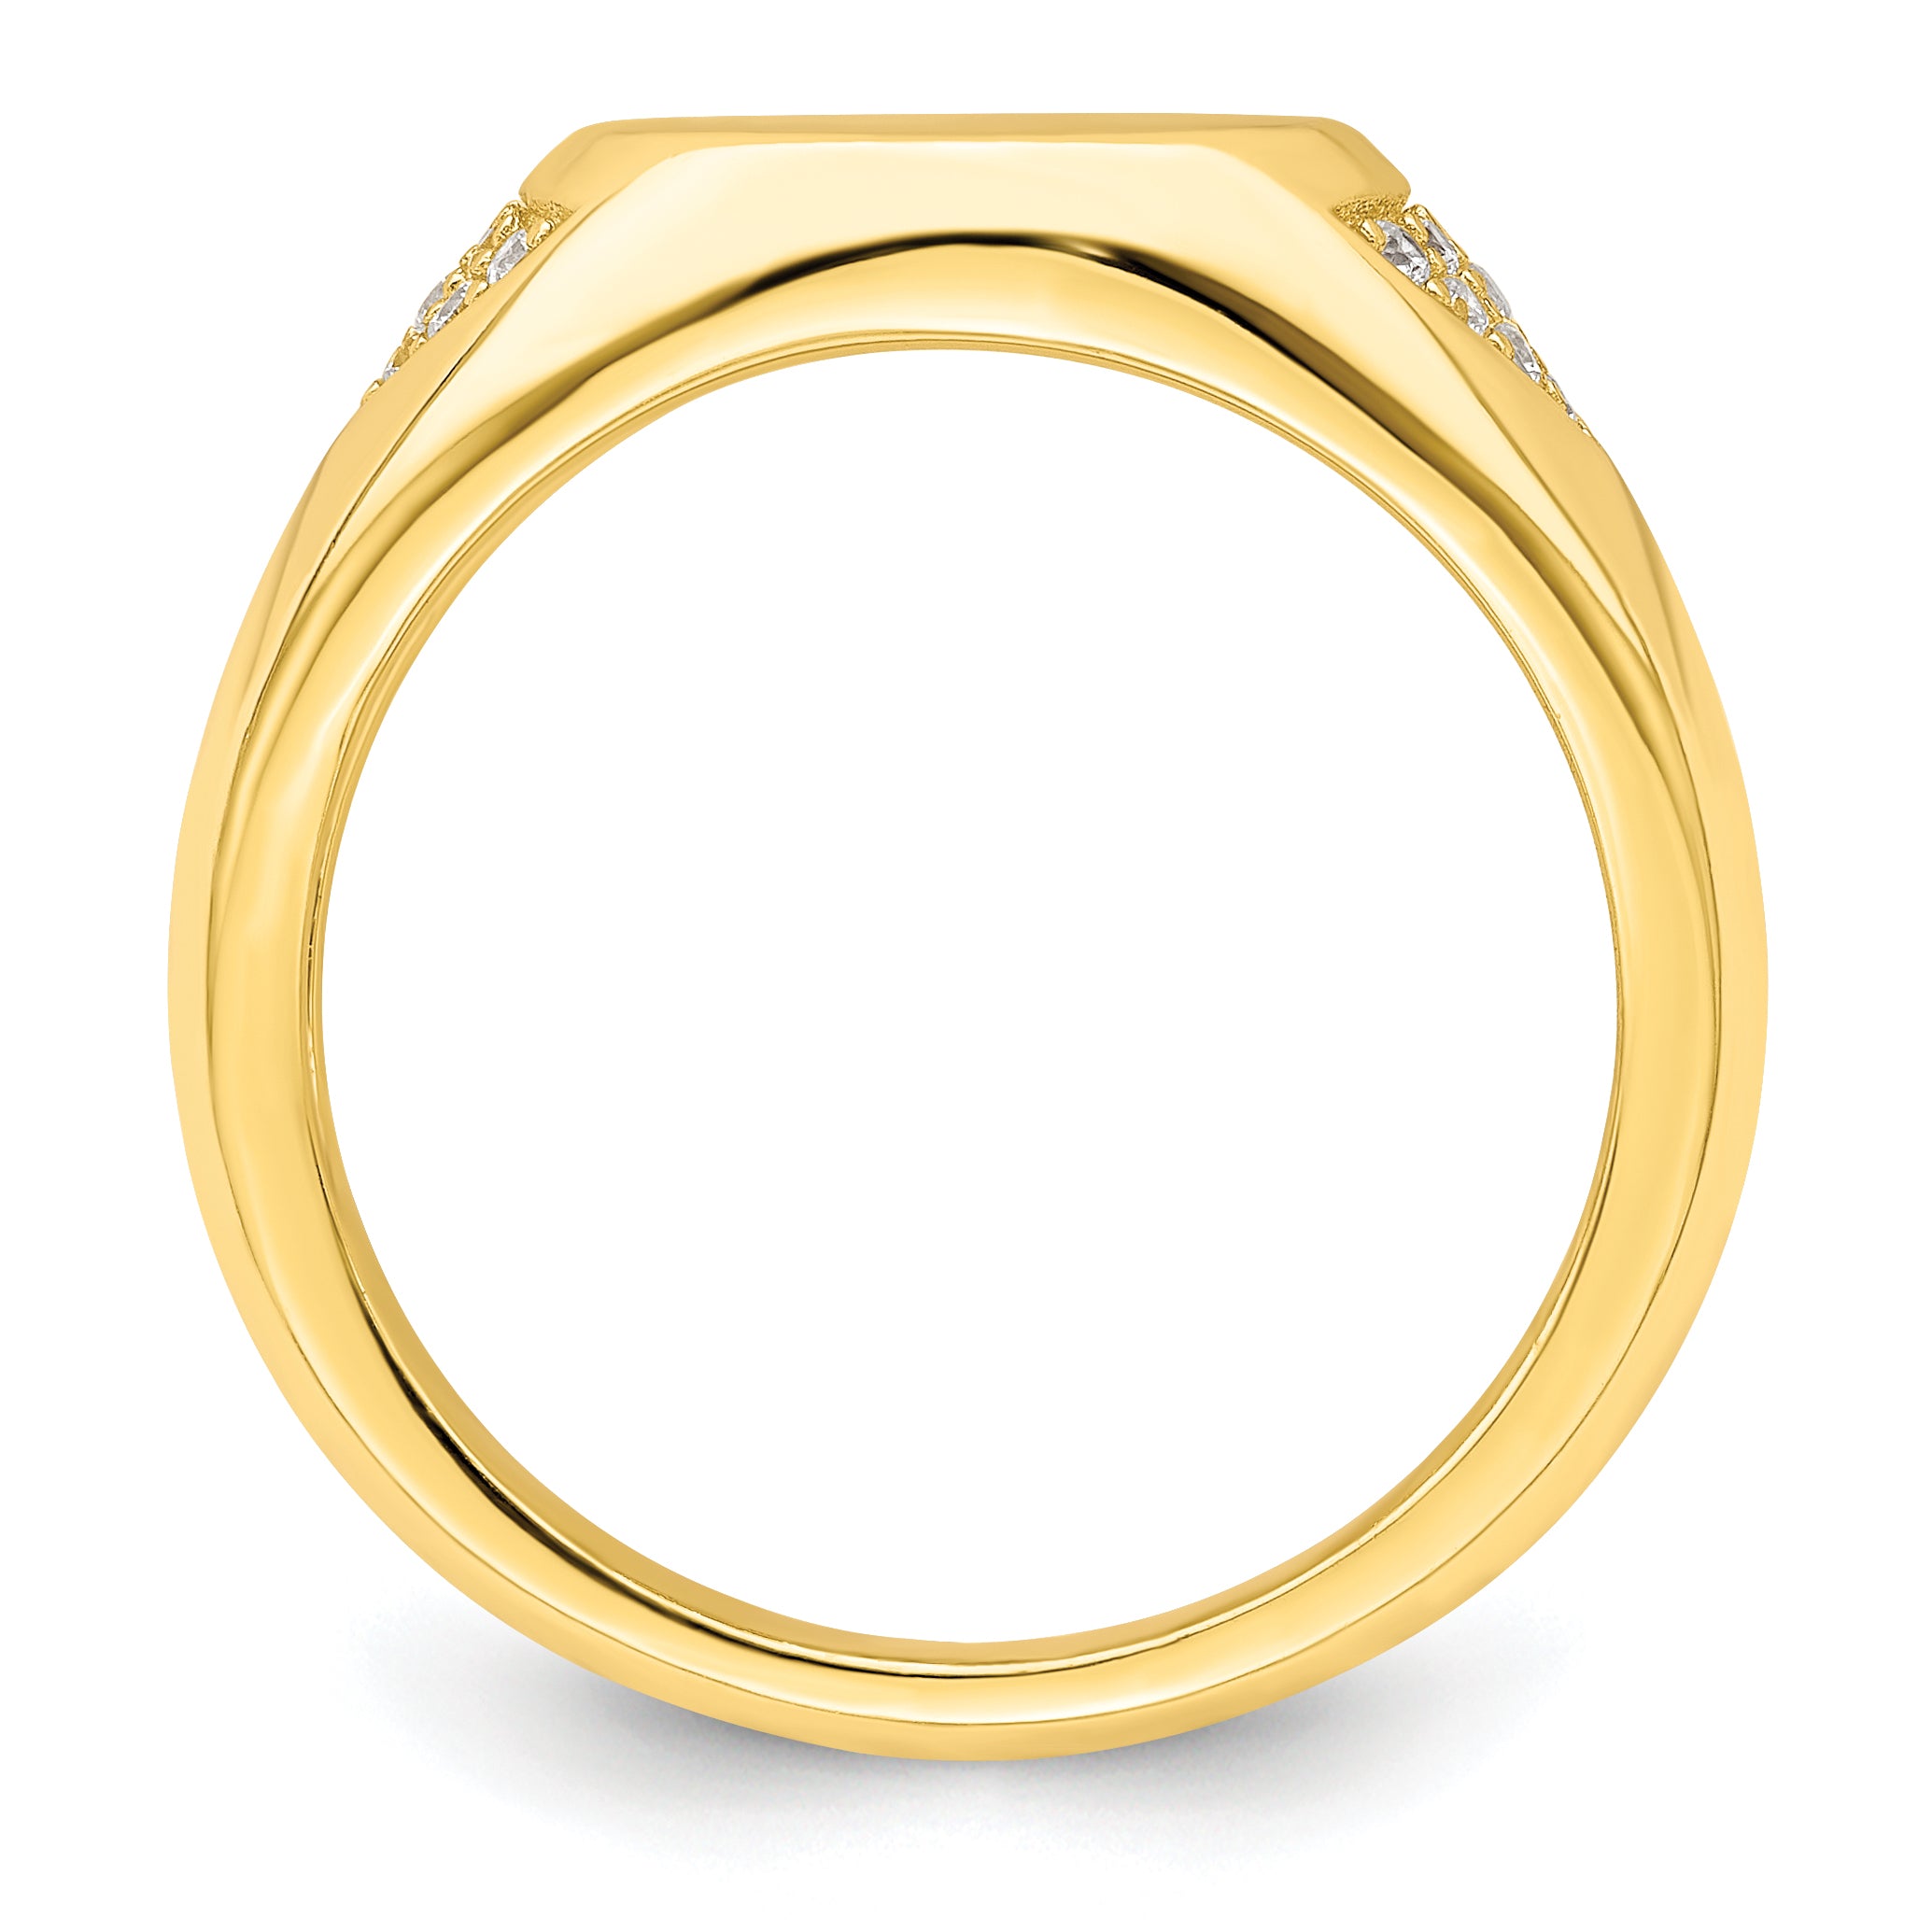 Sterling Silver CZ Gold-tone Signet Ring